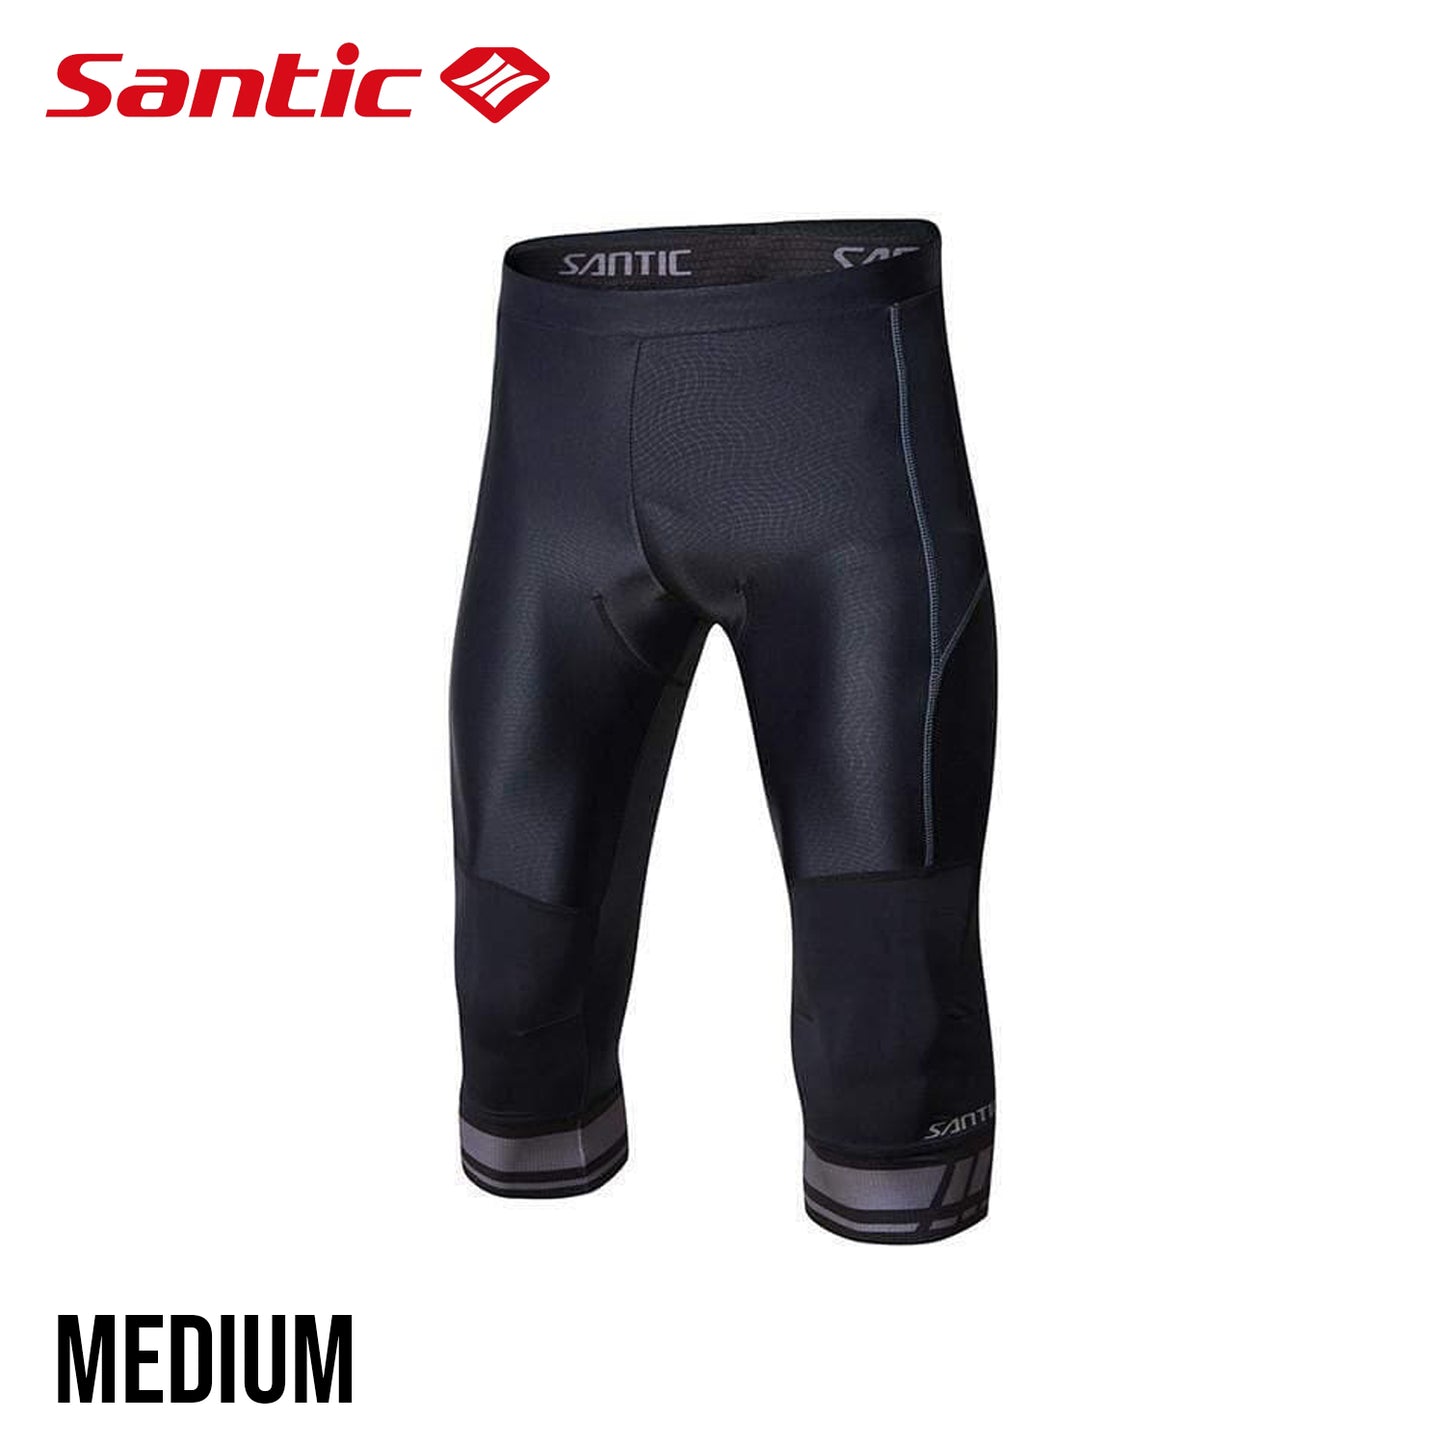 Santic Grayscale Men's Spring Summer 3/4 Cycling Tights - Black